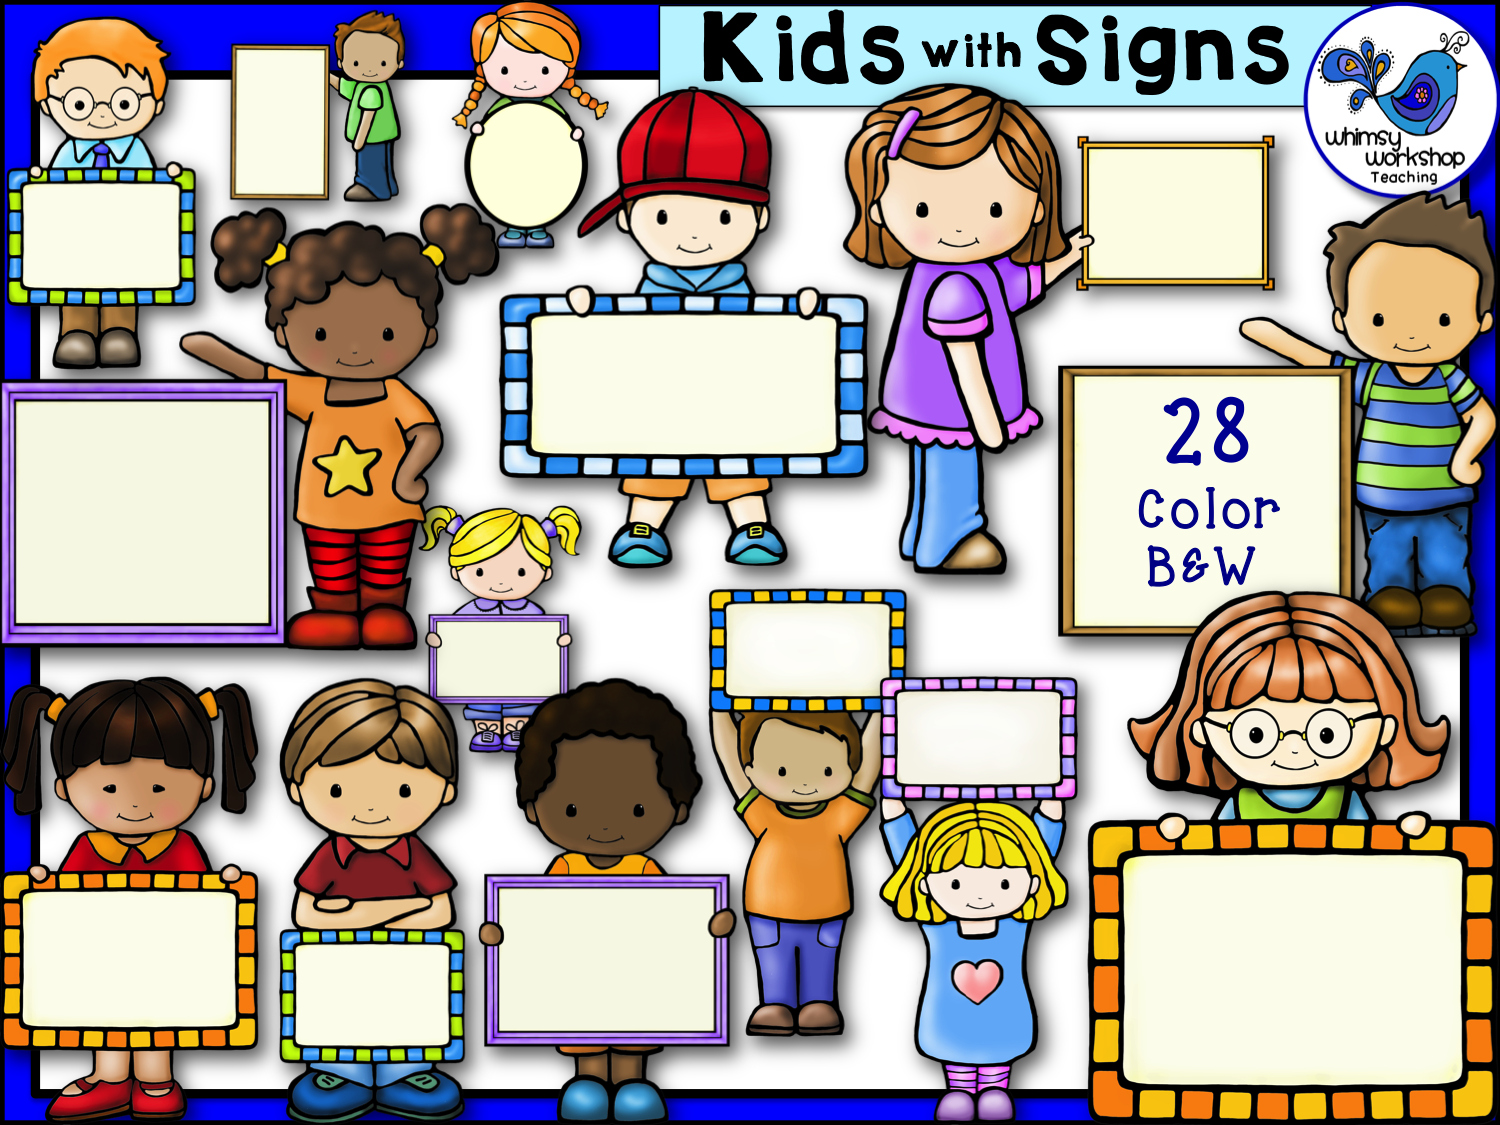 The Kids Are Back Again This Time Holding Signs That You Can Add Your